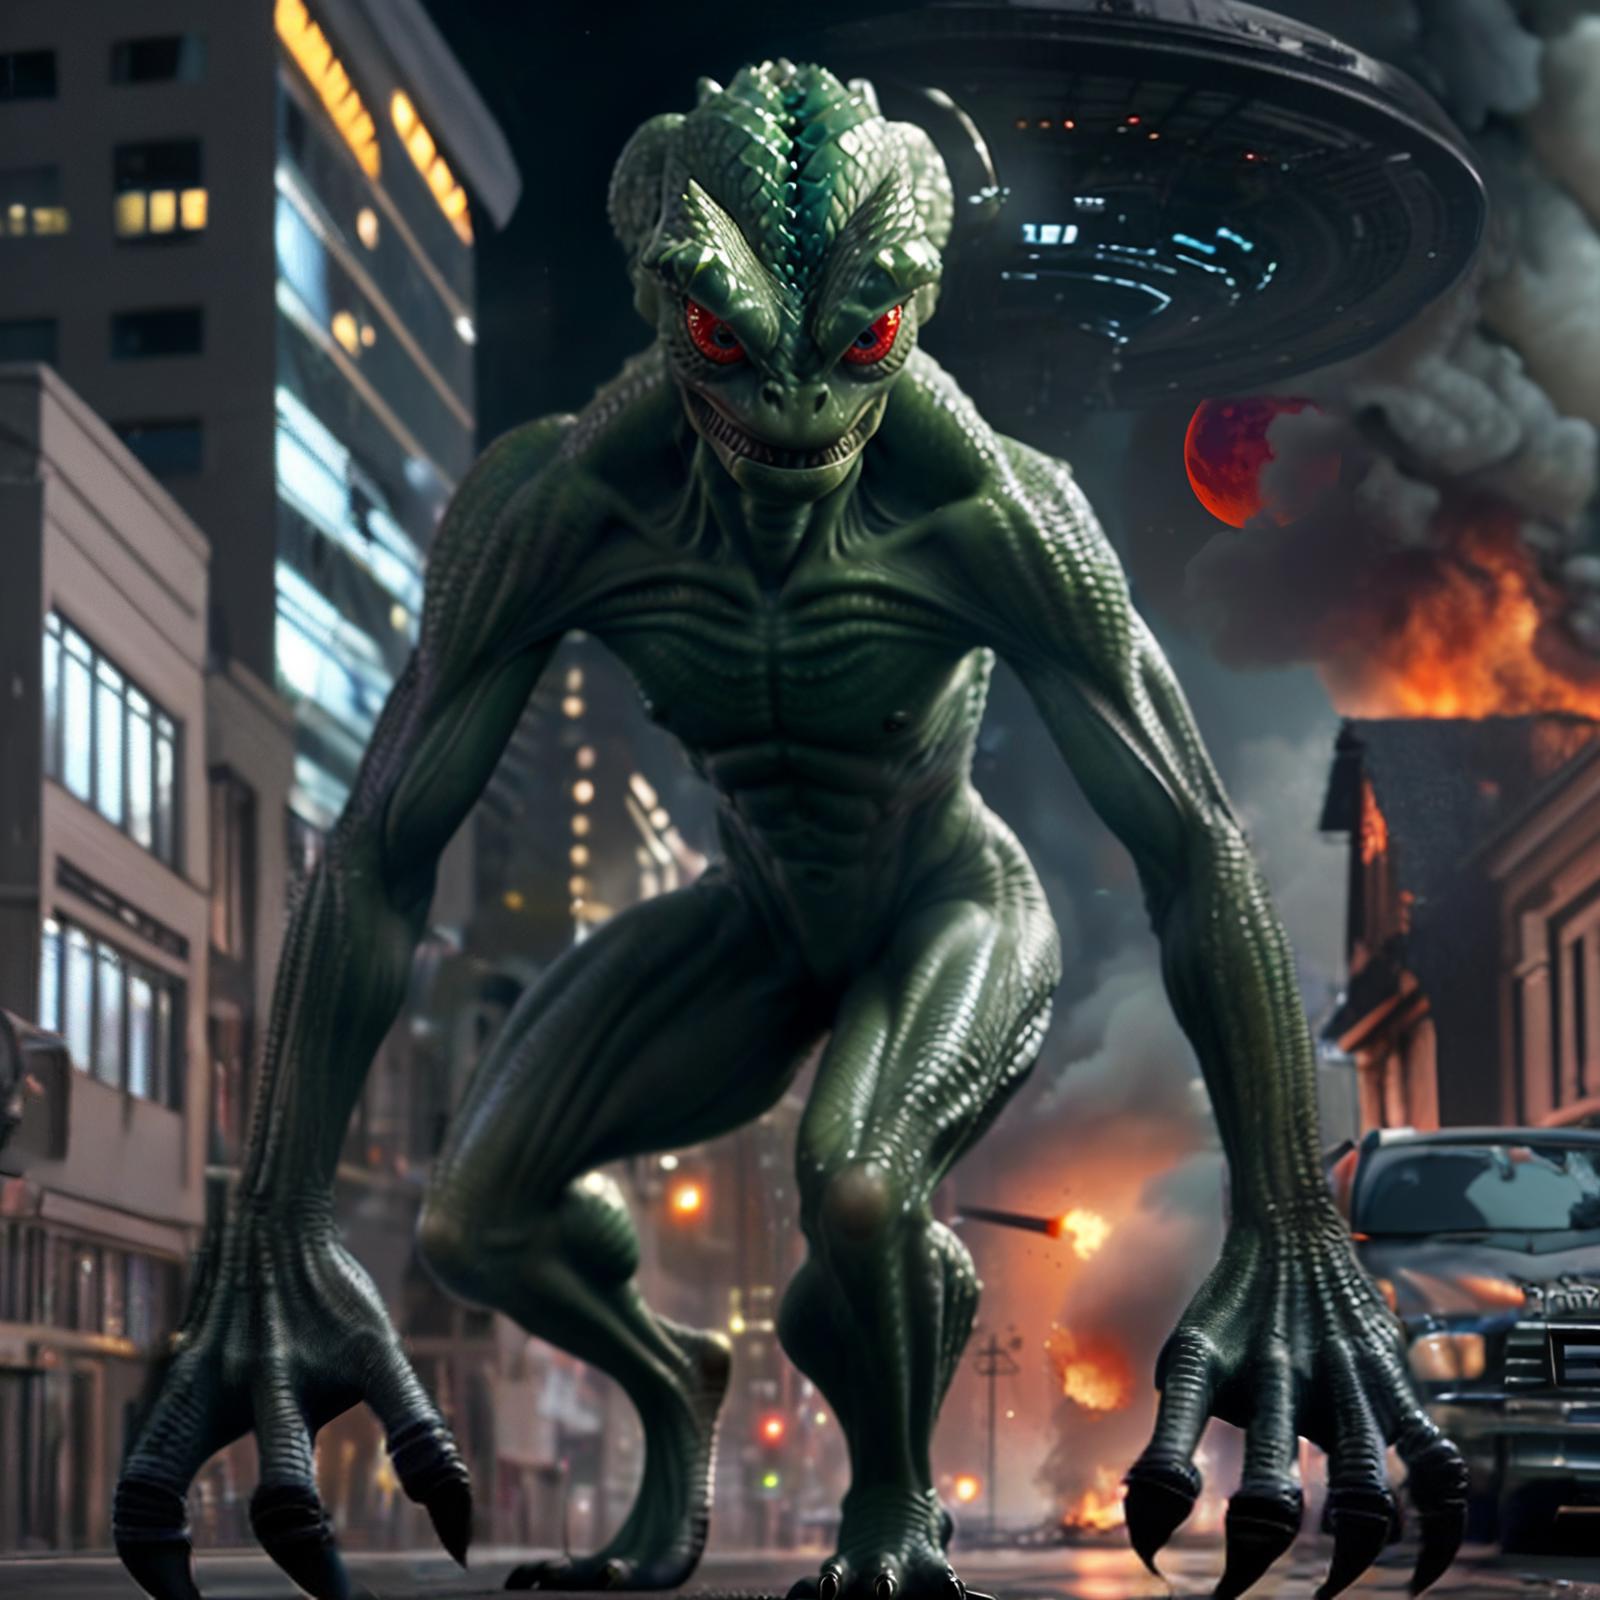 A green alien with a car in the background.